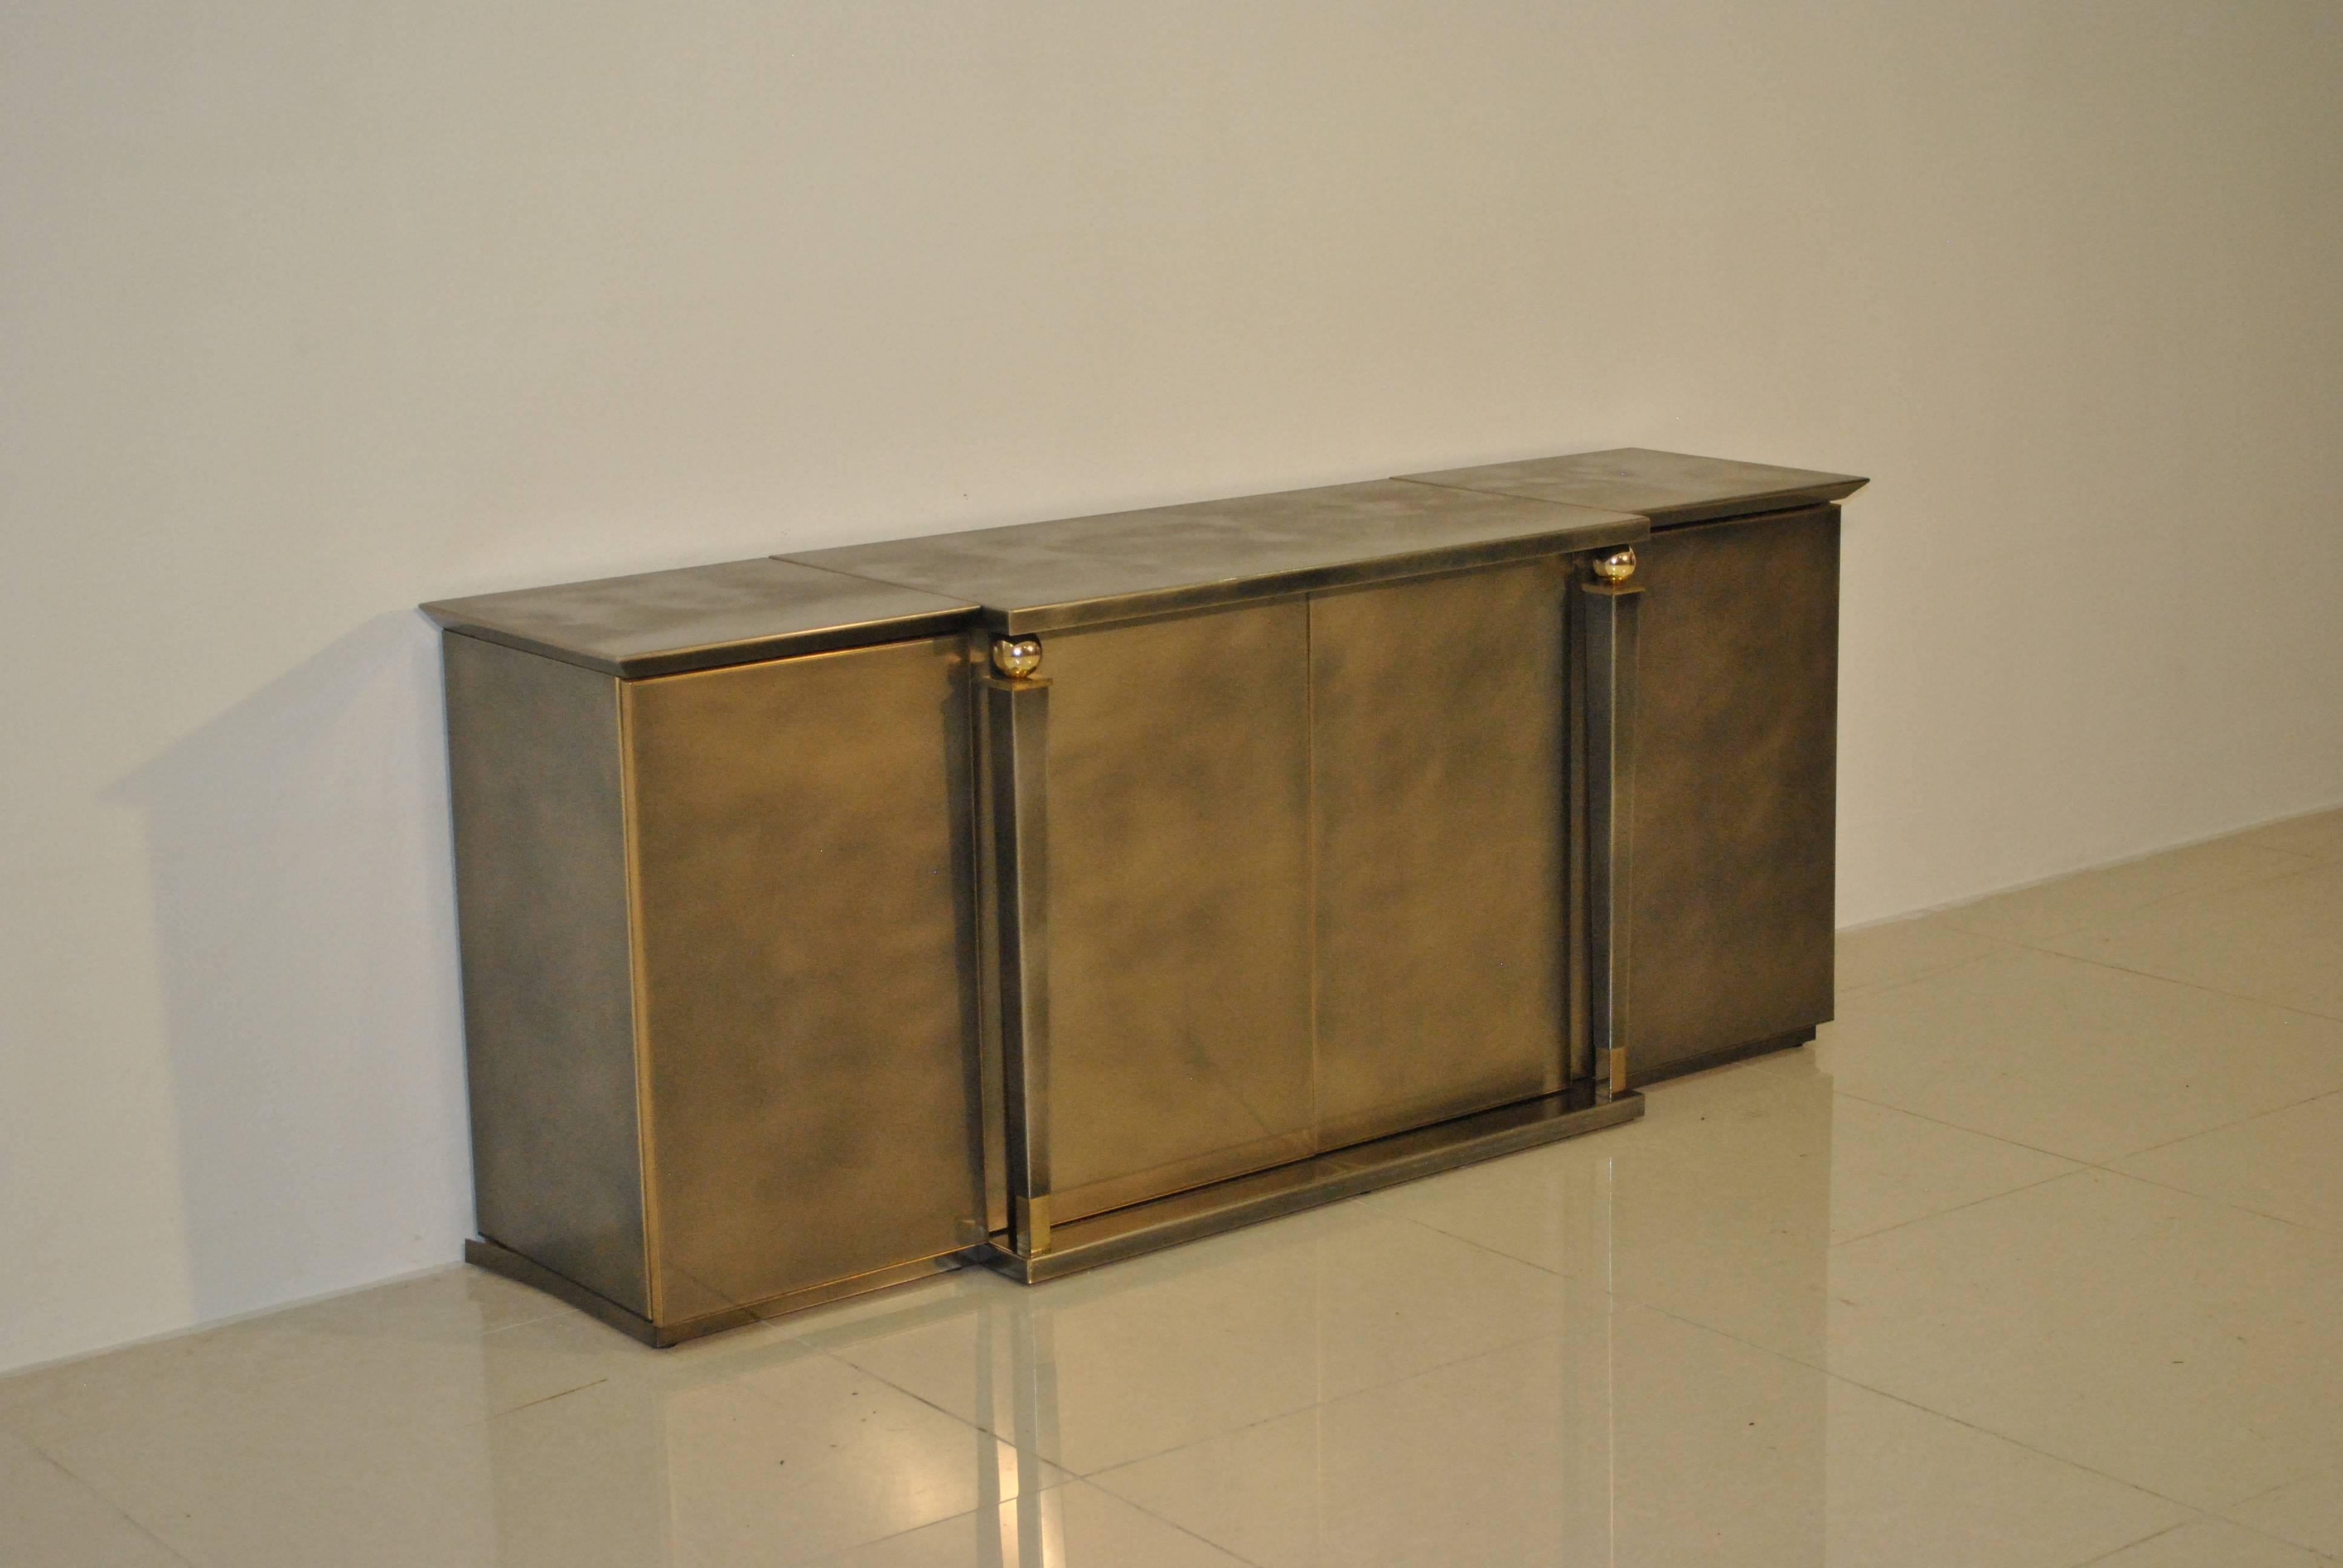 Very rare and nice neoclassical sideboard by Belgo Chrome, very high end piece made in Belgium in the 1980s.

The sideboard is entirely made in brushed patina steel with solid brass and 24-karat gold-plated details.

Very good condition with